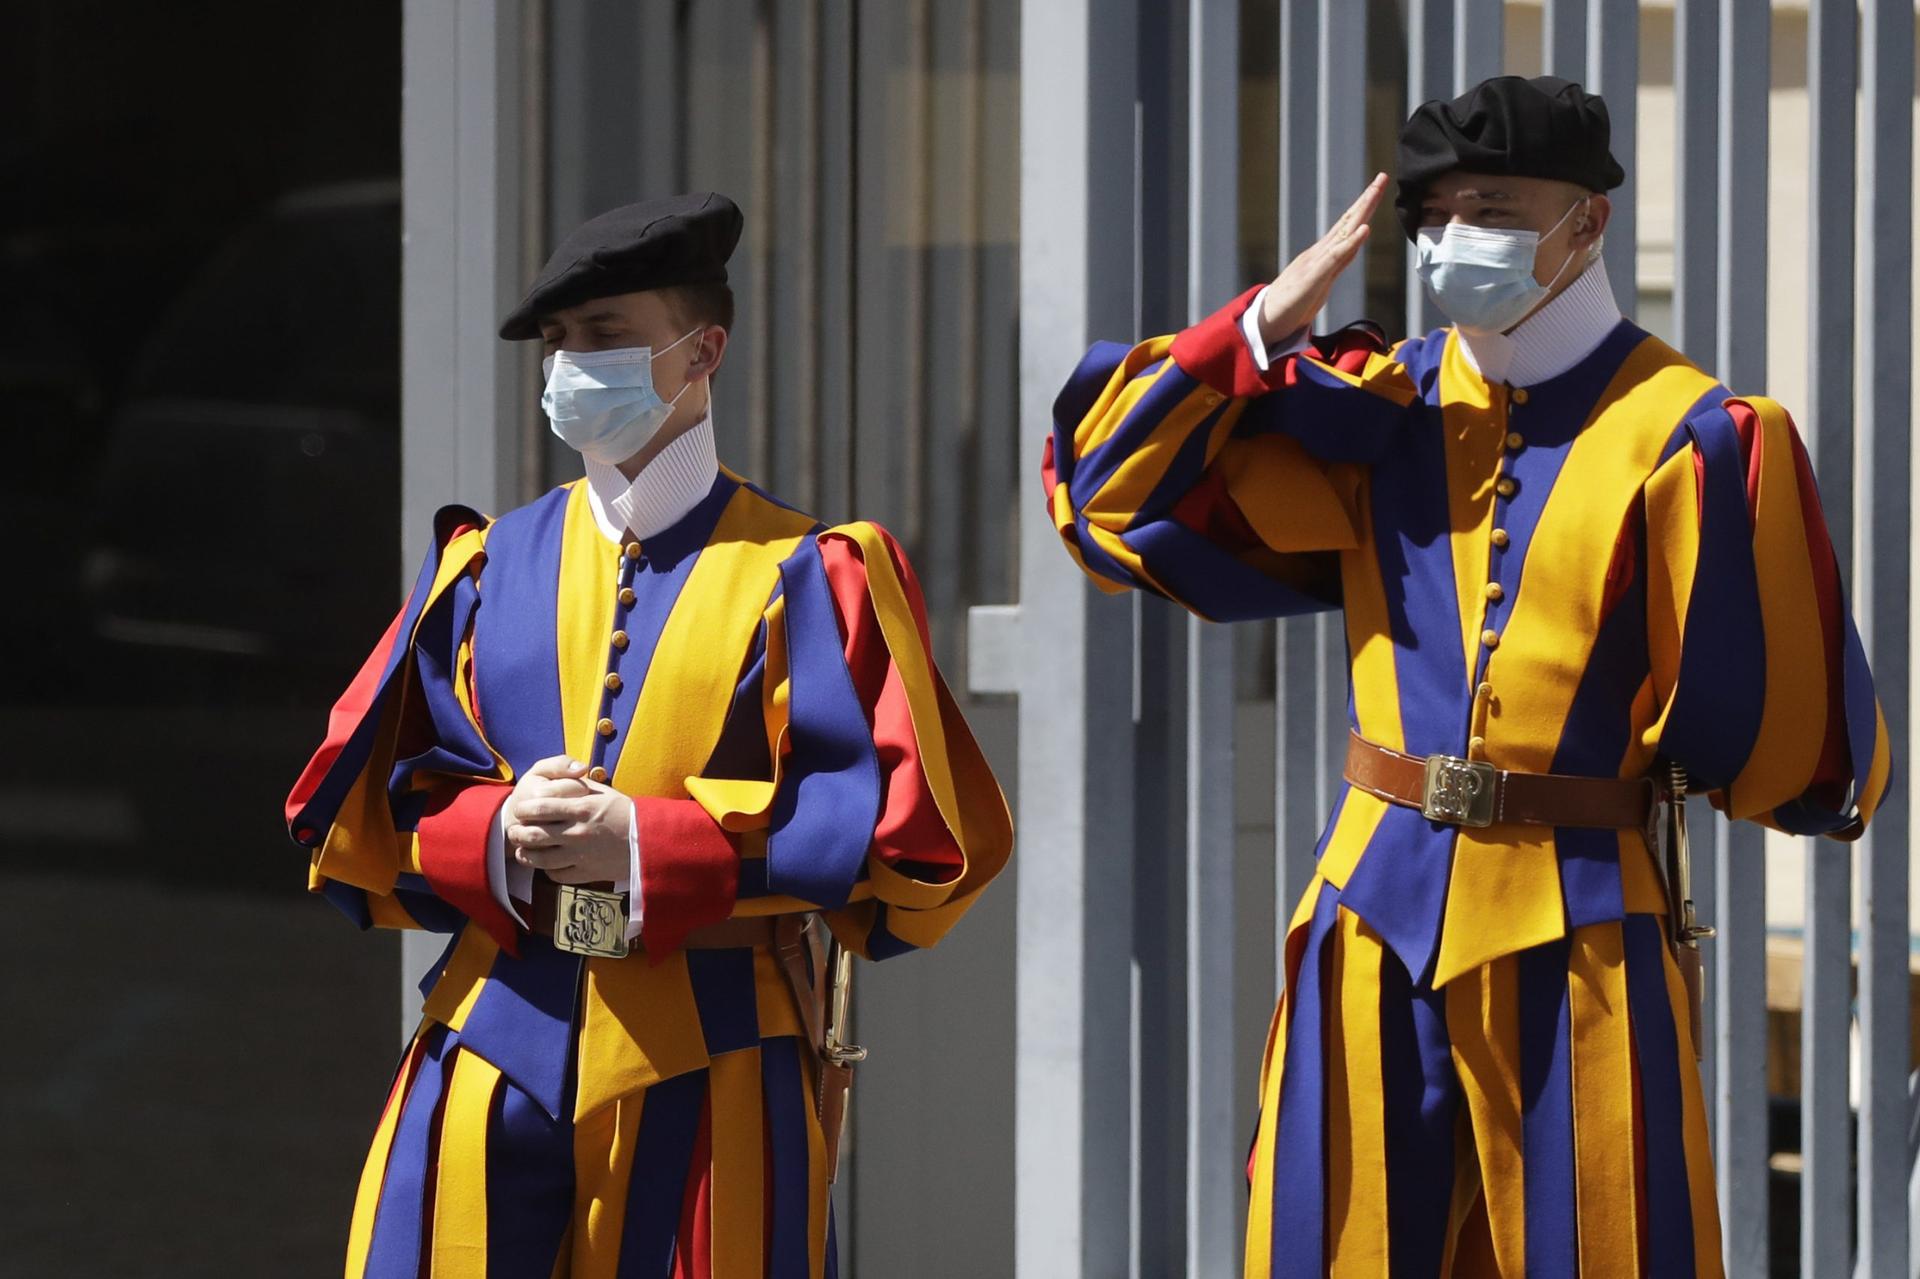 Swiss Guard honor members who died in 1527 in subdued ceremony